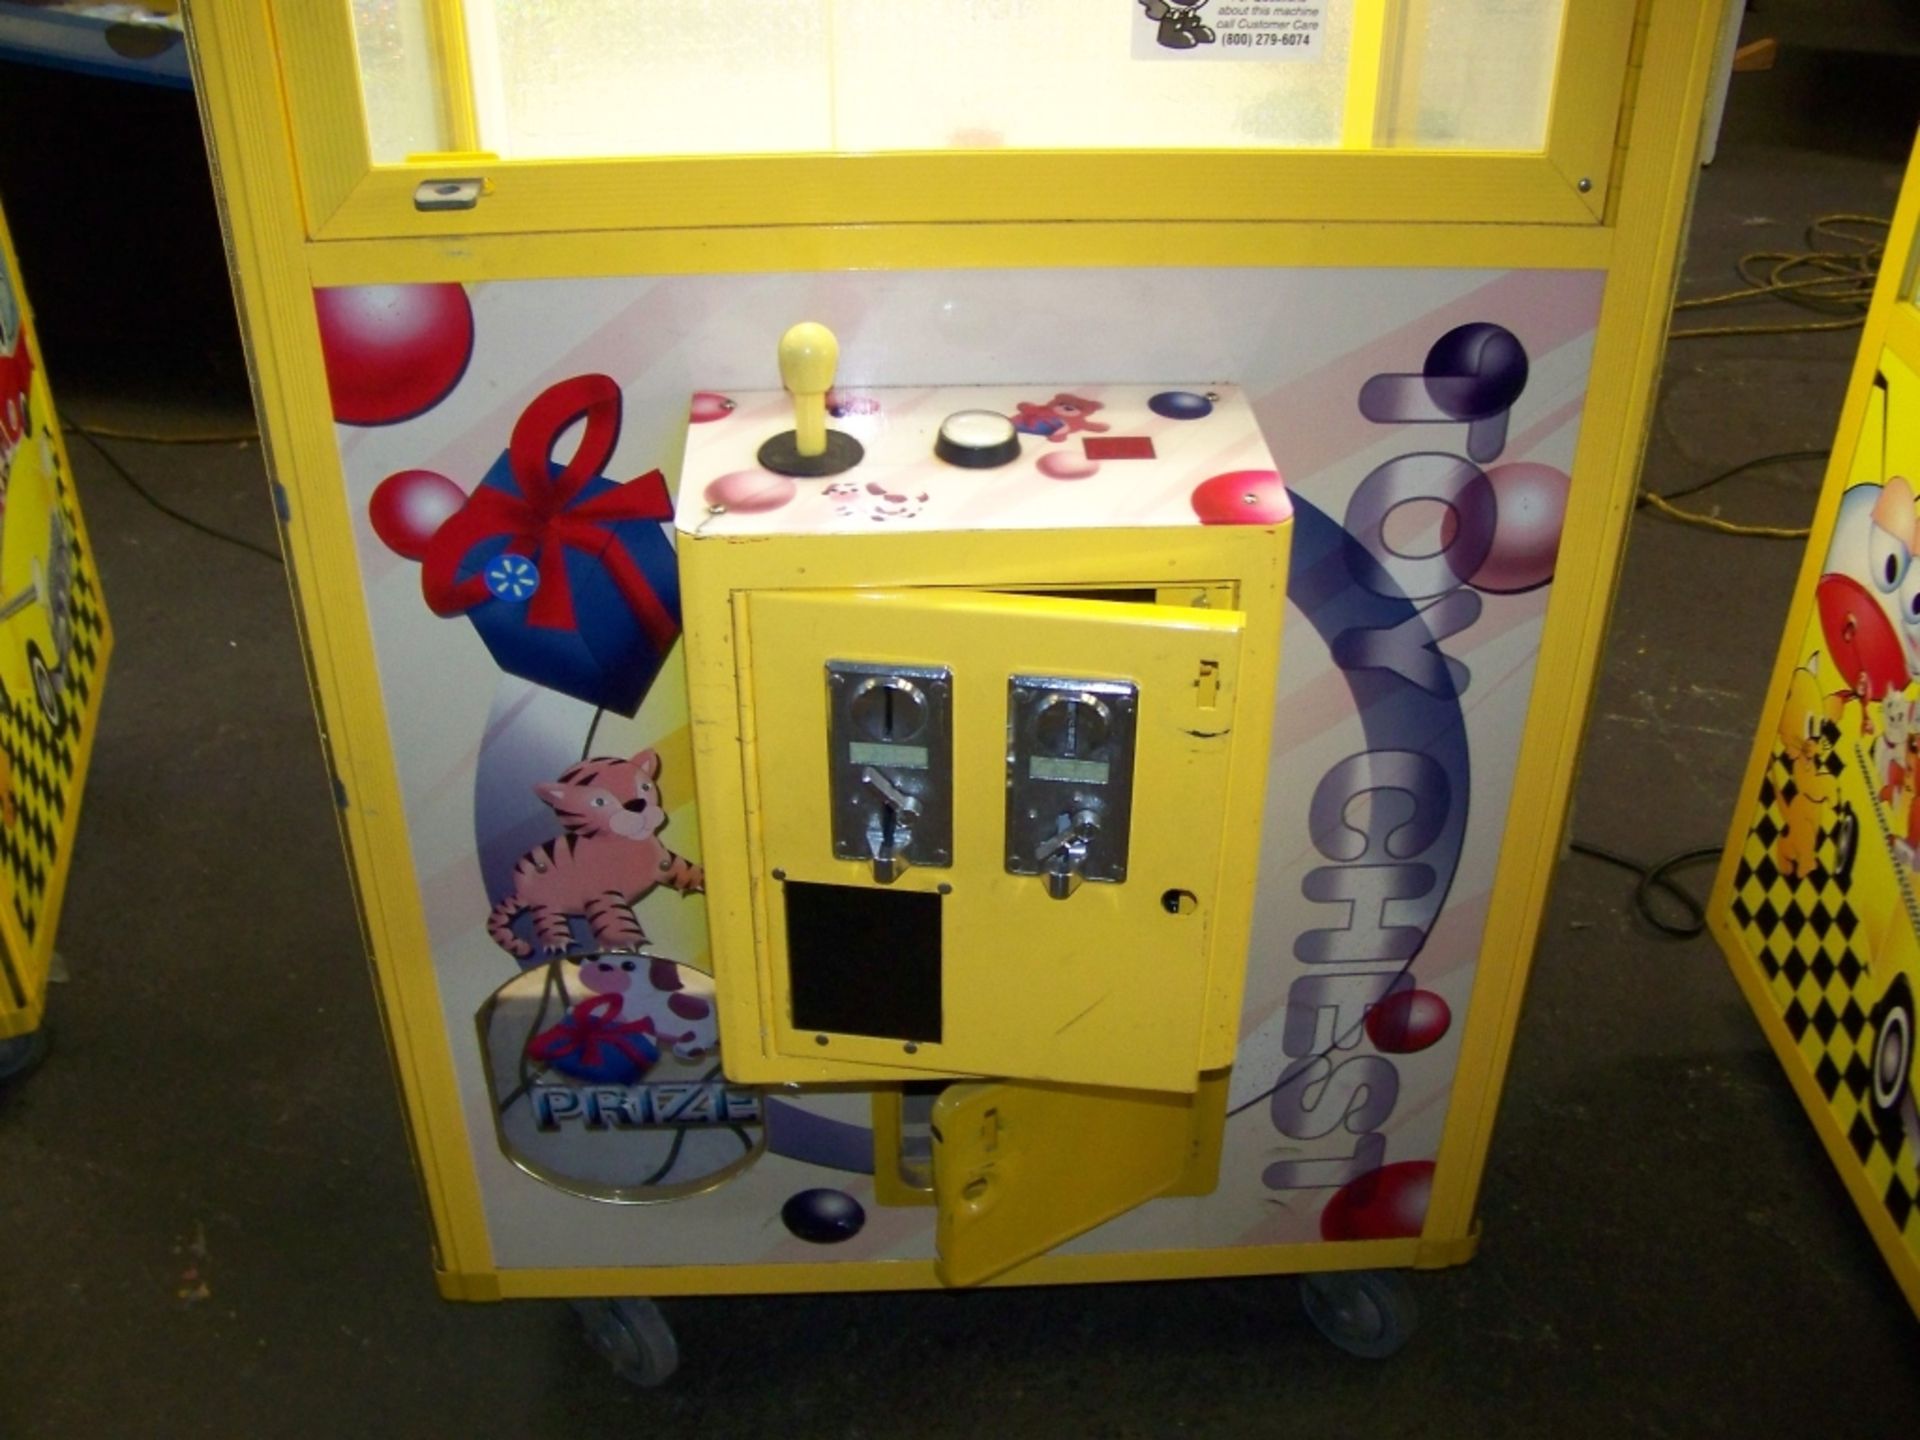 30"" TOY CHEST PLUSH CLAW CRANE MACHINE SMART Item is in used condition. Evidence of wear and - Image 3 of 3